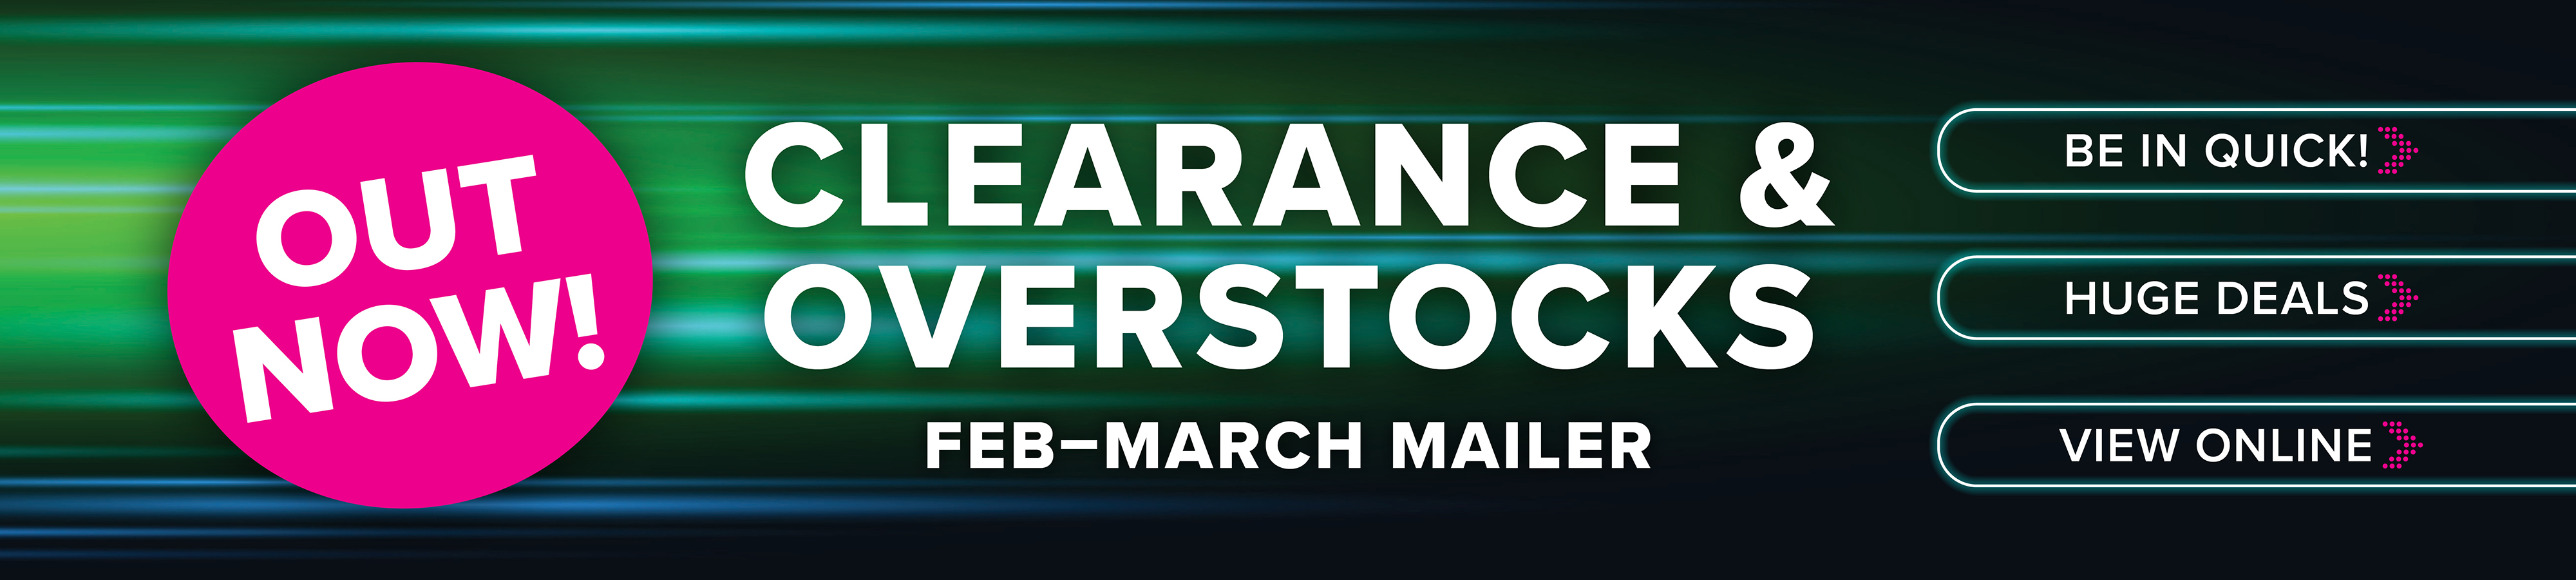 Overstock and Clearance Specials